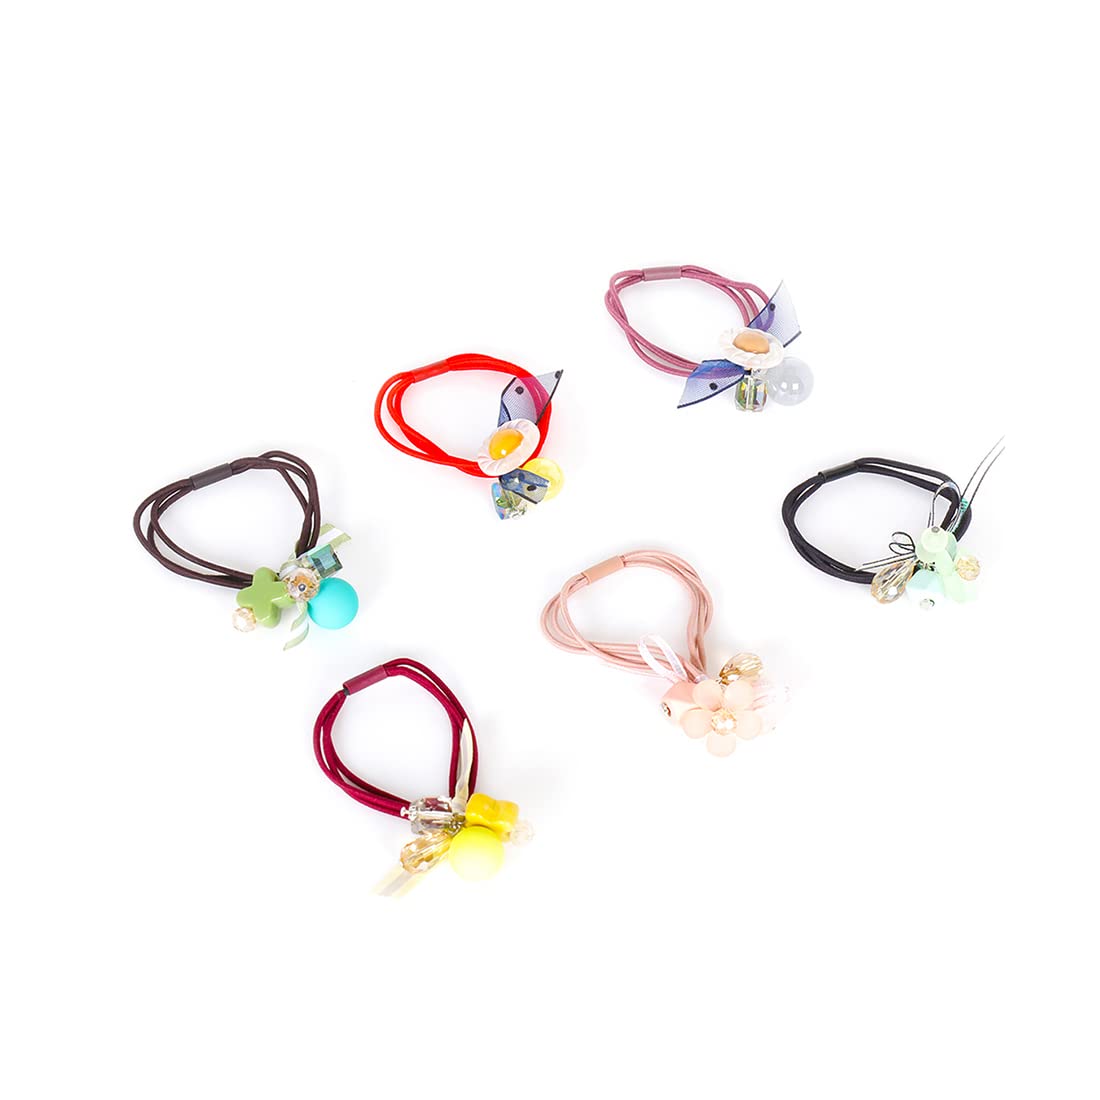 Yellow Chimes 6 Pcs Rubber Bands High Elsticity Charm Ponytail Holders Hair Accessories (Pack of 6), Multi-Color, Medium (YCHARB-GL011-MC)